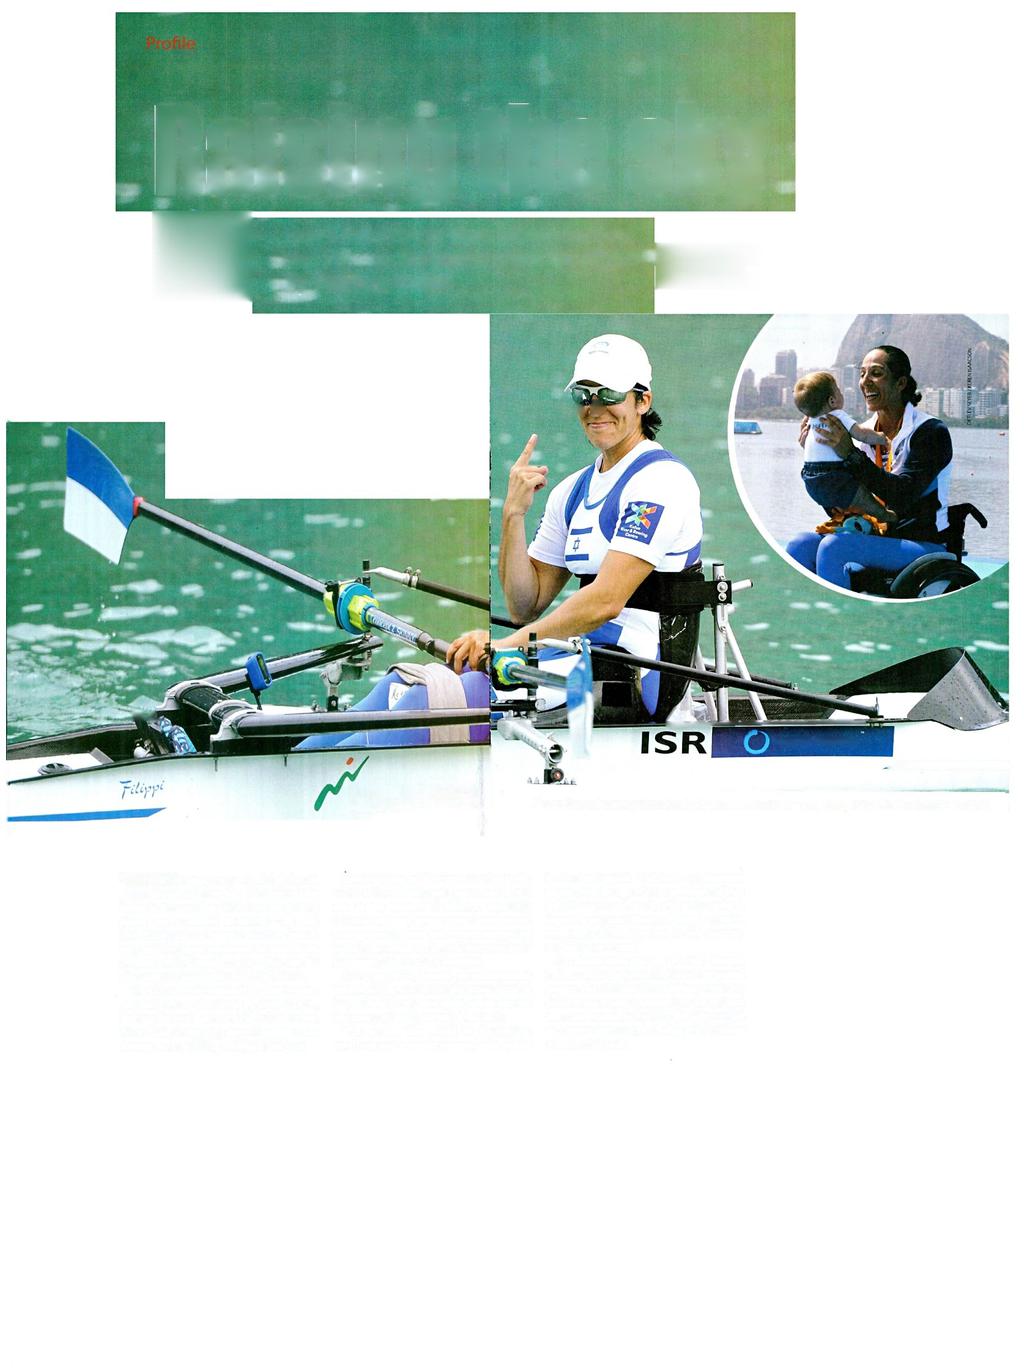 Raising the sky Israeli Paralympic stars Moran Samuel and Pascale Berkowitz shine for others HNHHH By Patricia Golan K BBBMhI w *ifc MIL worldrowing ALTSHULER SHAHAM Change. *י י י י ו!